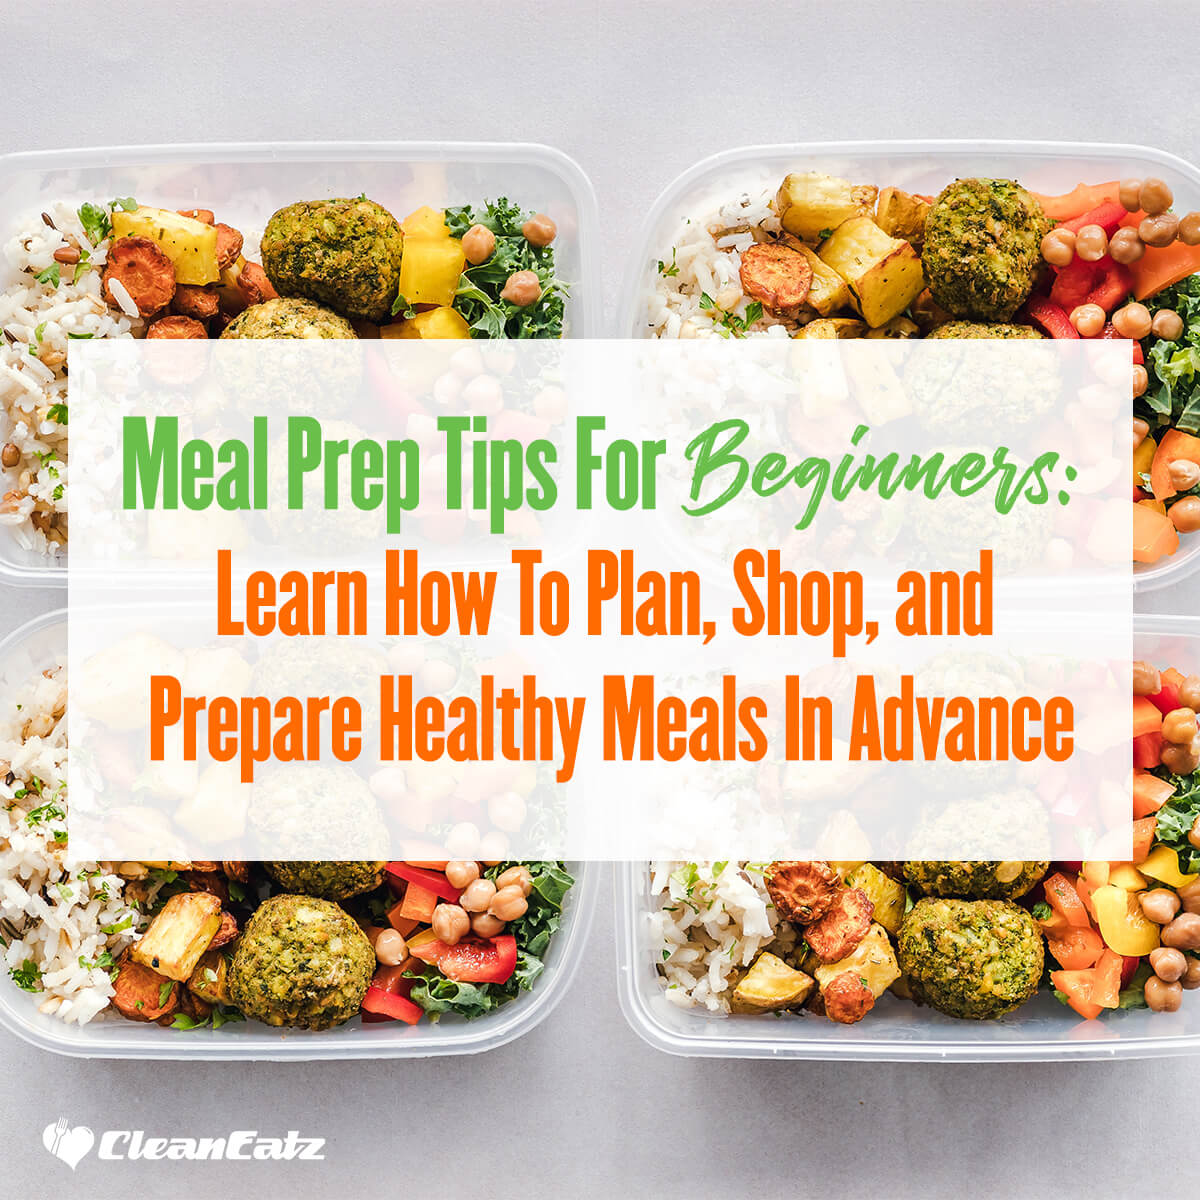 https://dropinblog.net/34245526/files/featured/Meal-Prep-Tips-For-Beginners--Learn-How-To-Plan_-Shop_-and-Prepare-Healthy-Meals-In-Advance.jpg